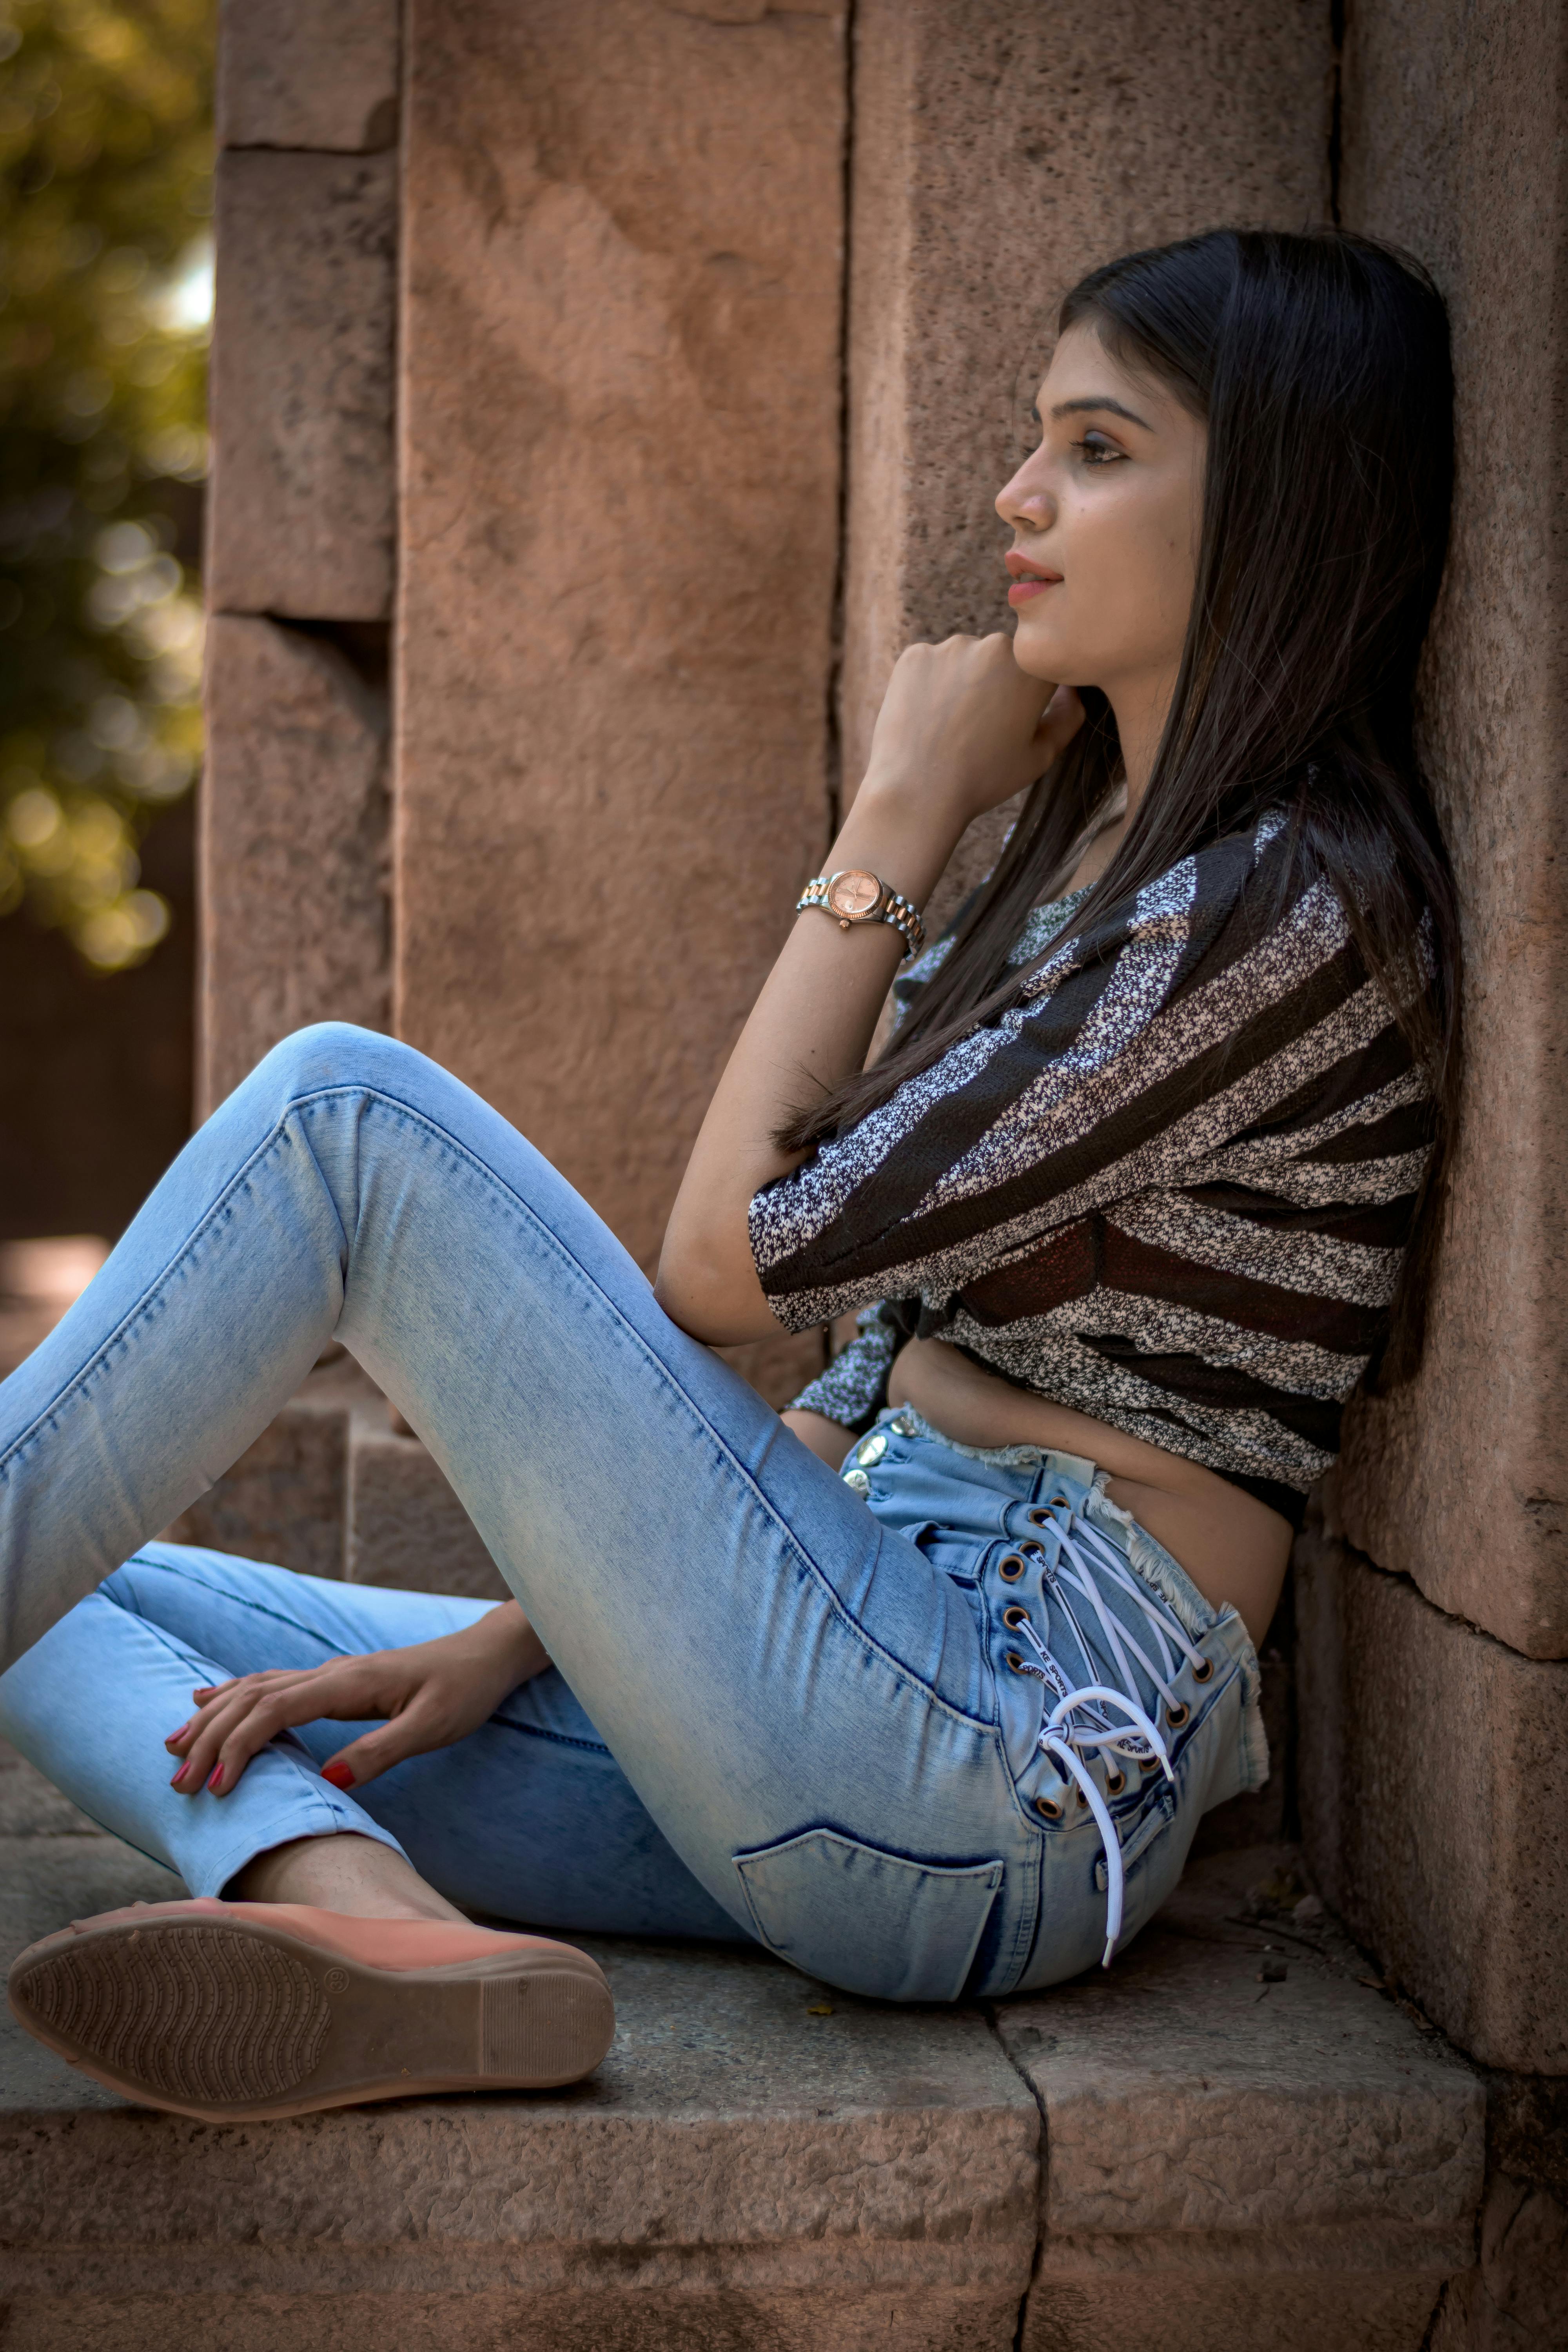 Woman in Black Crop Top and Denim Jeans Leaning on the Wall while